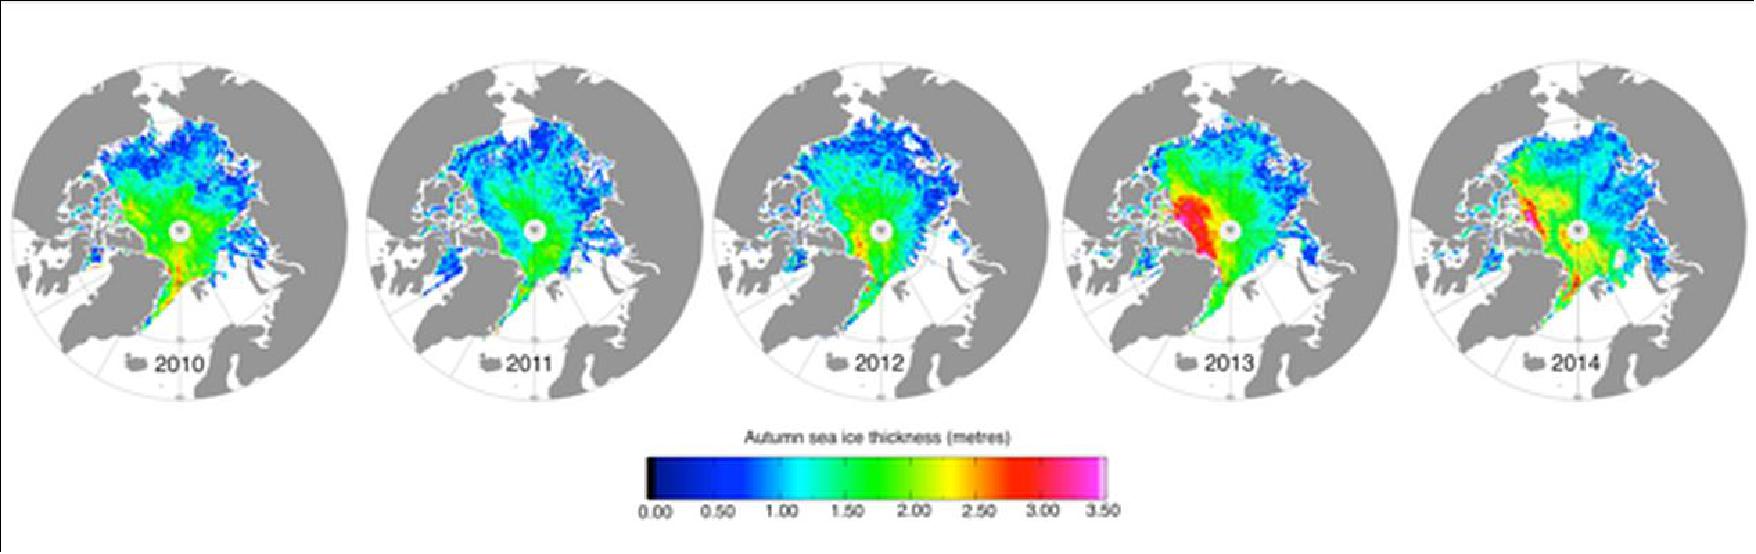 Figure 66: Changes in autumn Arctic sea-ice observed by CryoSat-2 during the period 2010-2014 (image credit: UCL/CPOM/University of Leeds)